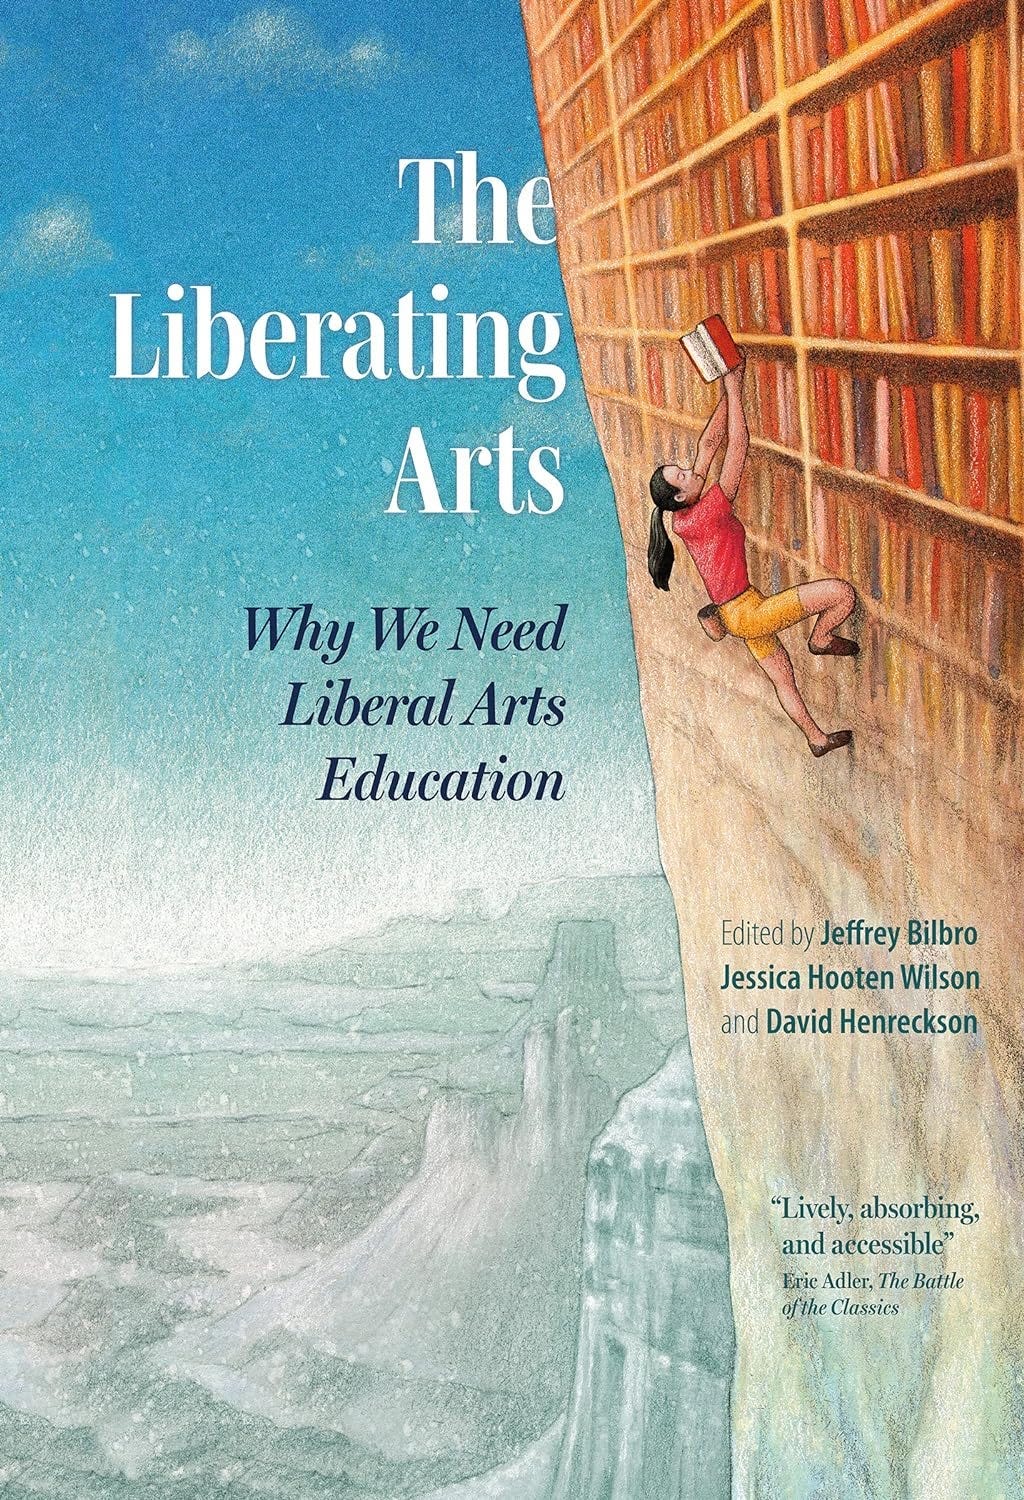 Cover of The Liberating Arts, published in 2023 by Plough Books. Edited by Jeffrey Bilbro, Jessica Hotten Wilson and David Henreckson. Depicts a mountain climber scaling a huge bookshelf made to look like a cliff-face, against the backdrop of a blue sky and some snowy mountains